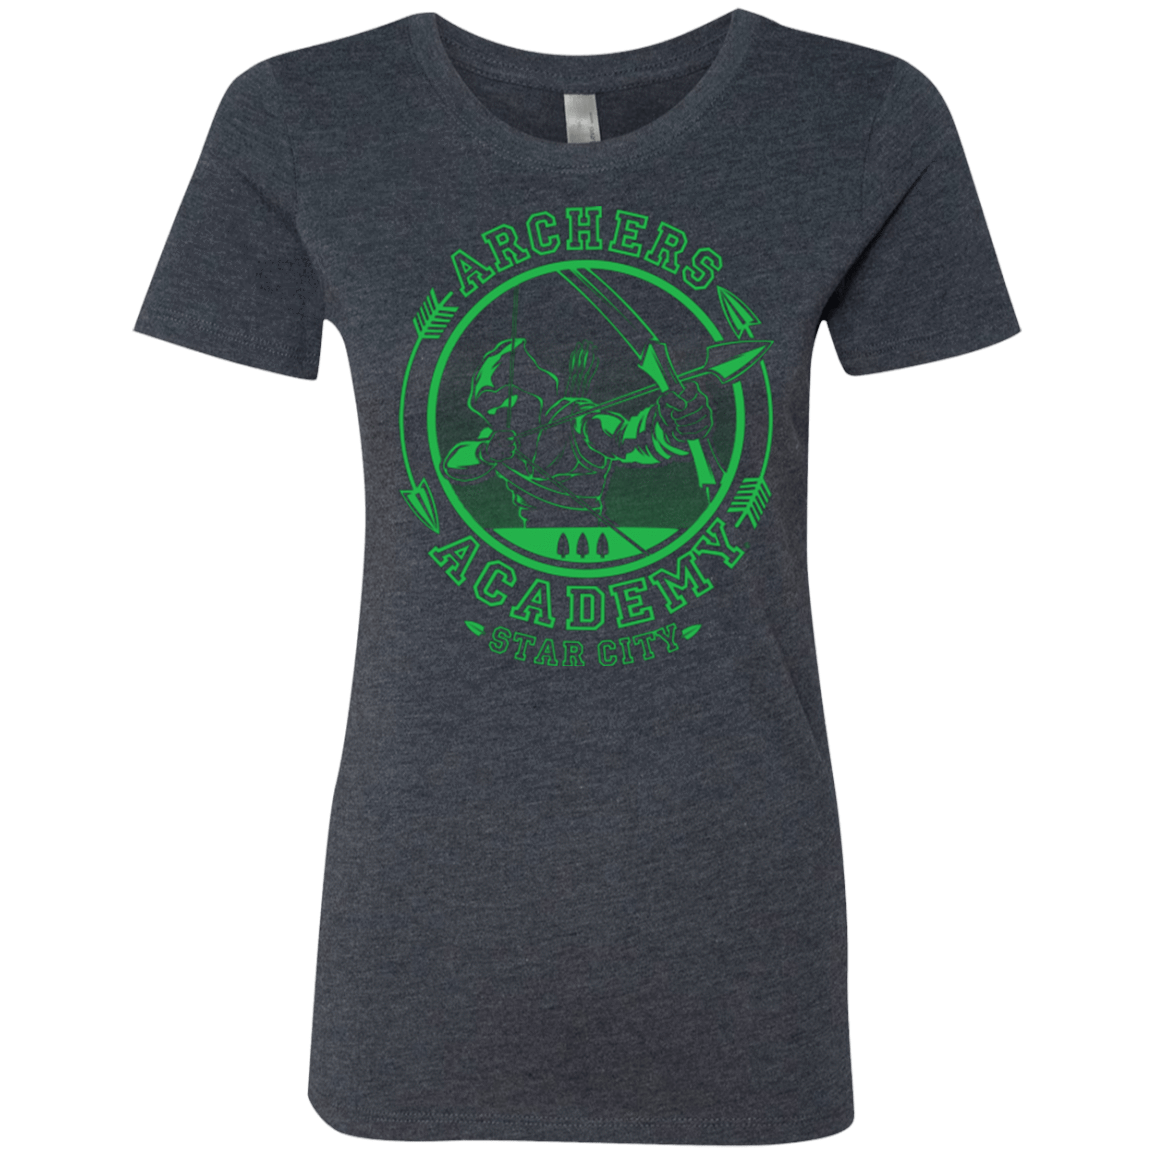 T-Shirts Vintage Navy / Small ARCHERS ACADEMY Women's Triblend T-Shirt